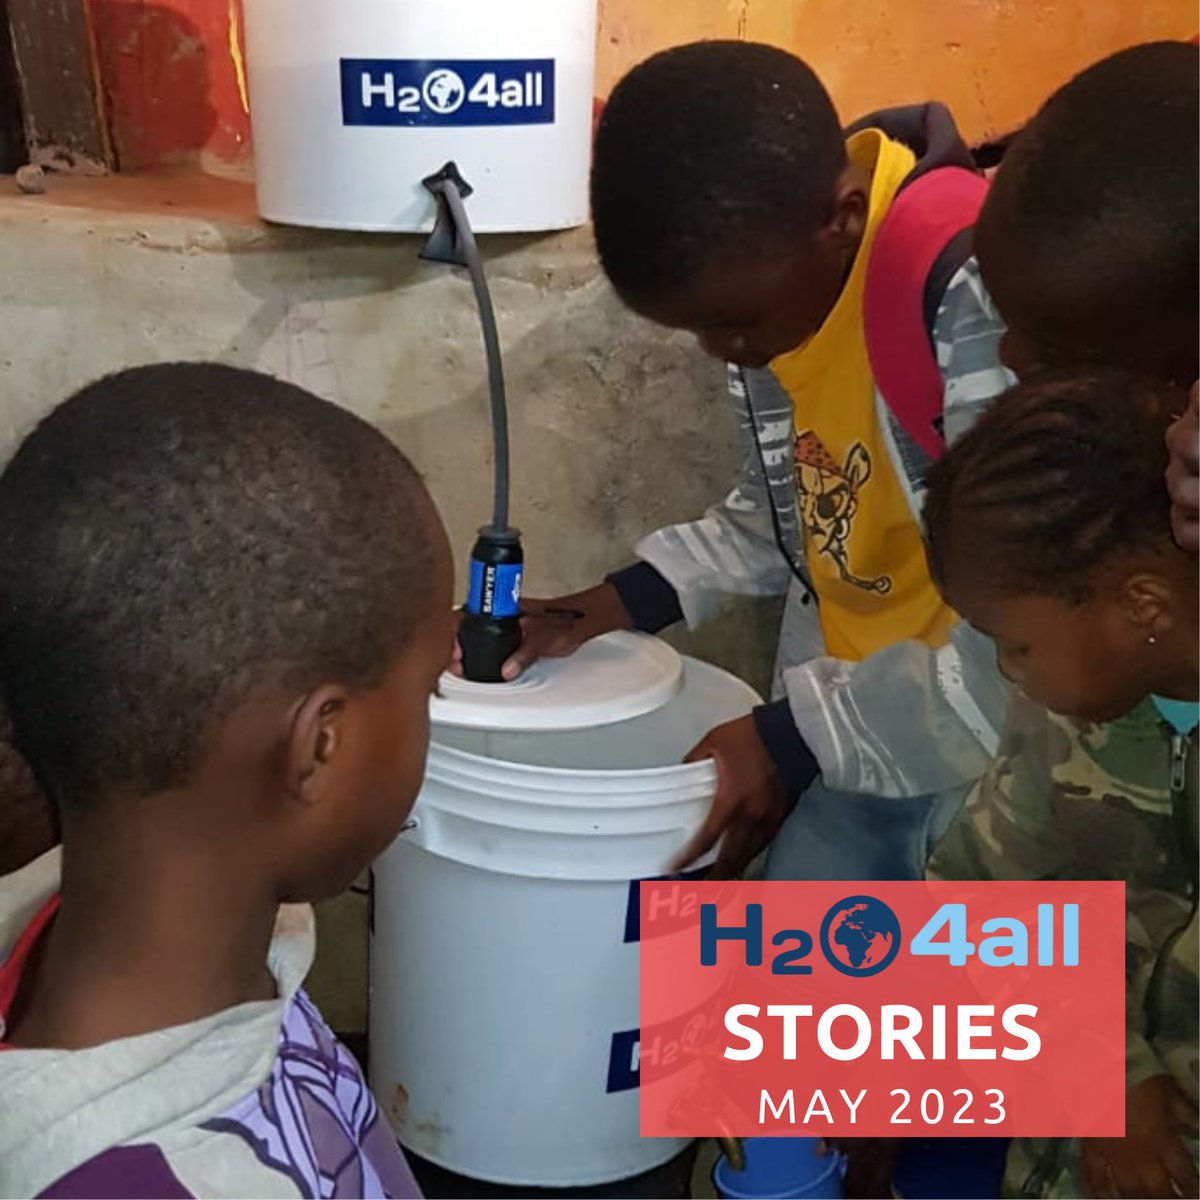 #H2O4ALLStories | Check out our May newsletter here: eepurl.com/isfebI.

#safewater #safewaterforall #water #newsletter #waterislife